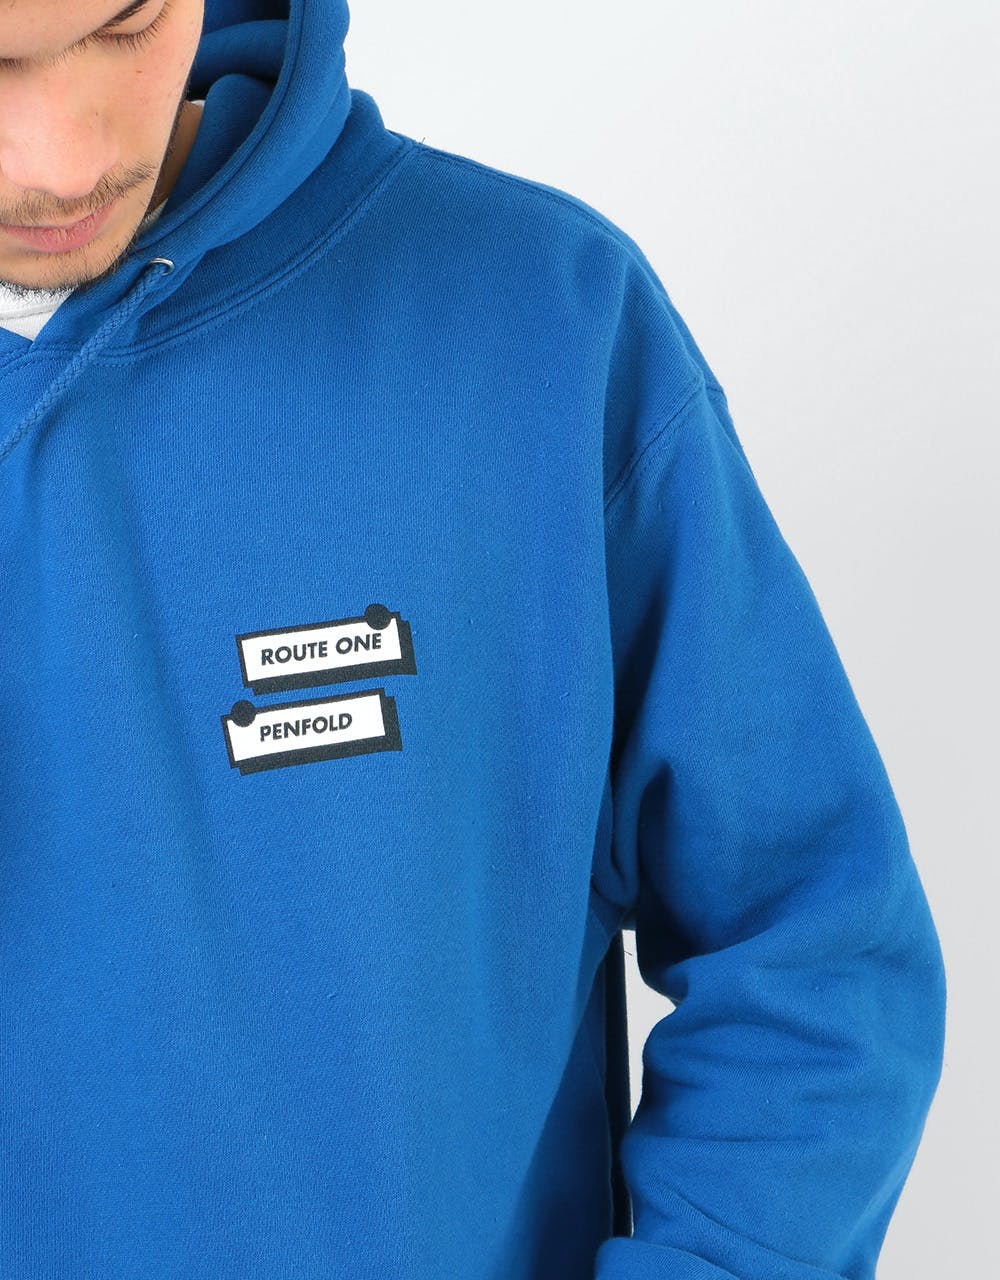 Route One x Mr. Penfold Memphis Blues Pullover Hoodie - Blue